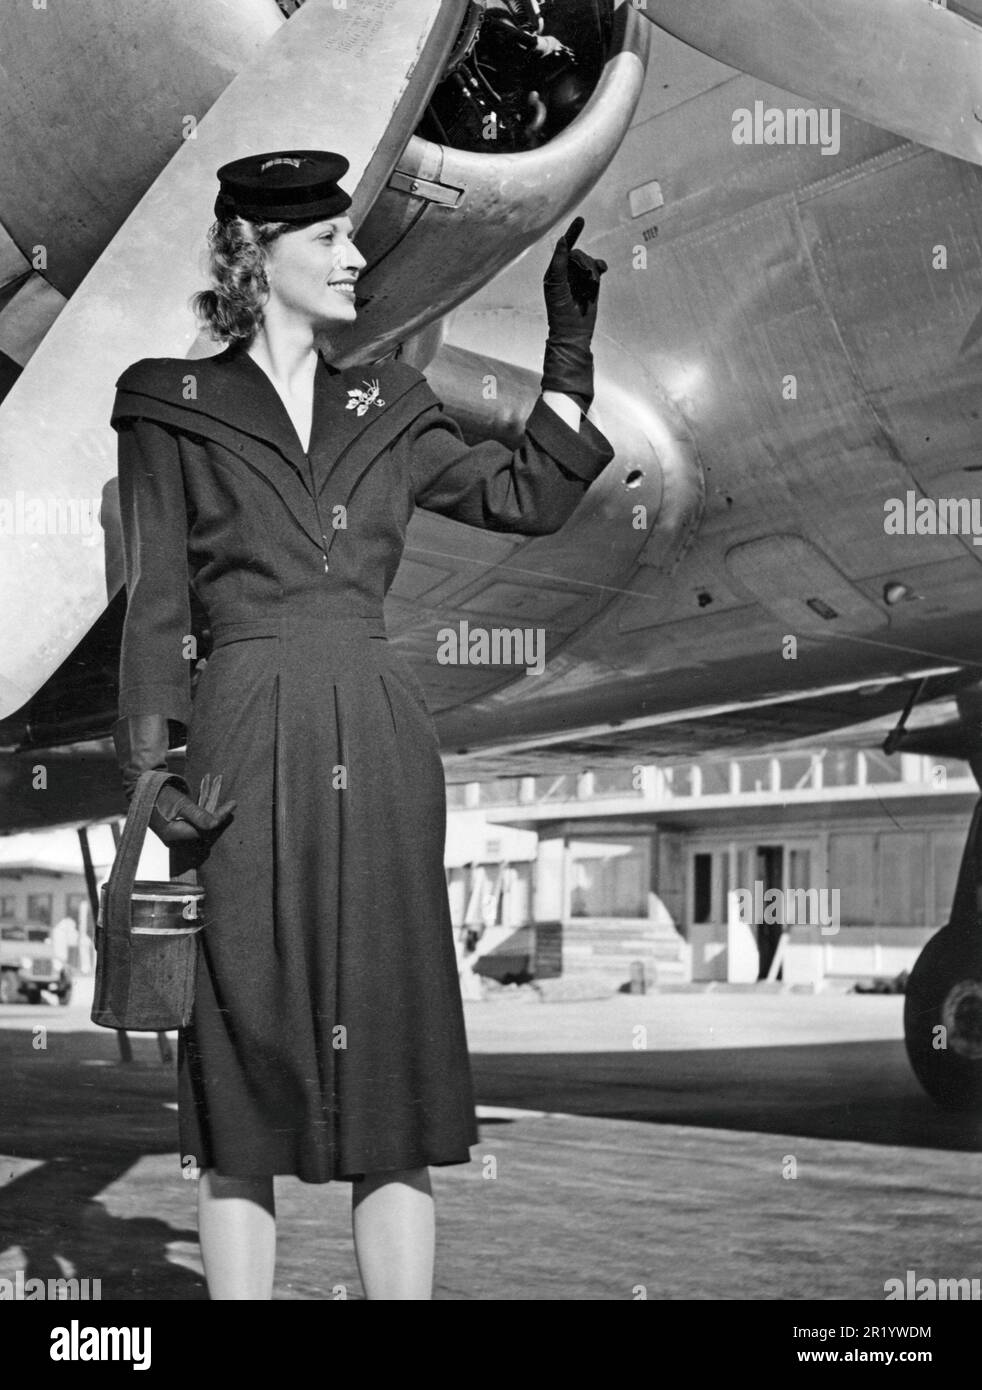 Women's fashion in the 1940s. A young woman on Bromma airport stands outside the plane. She is fashionably dressed in a dark outfit, matching hat, dark gloves and a round purse. Sweden 1944. Stock Photo